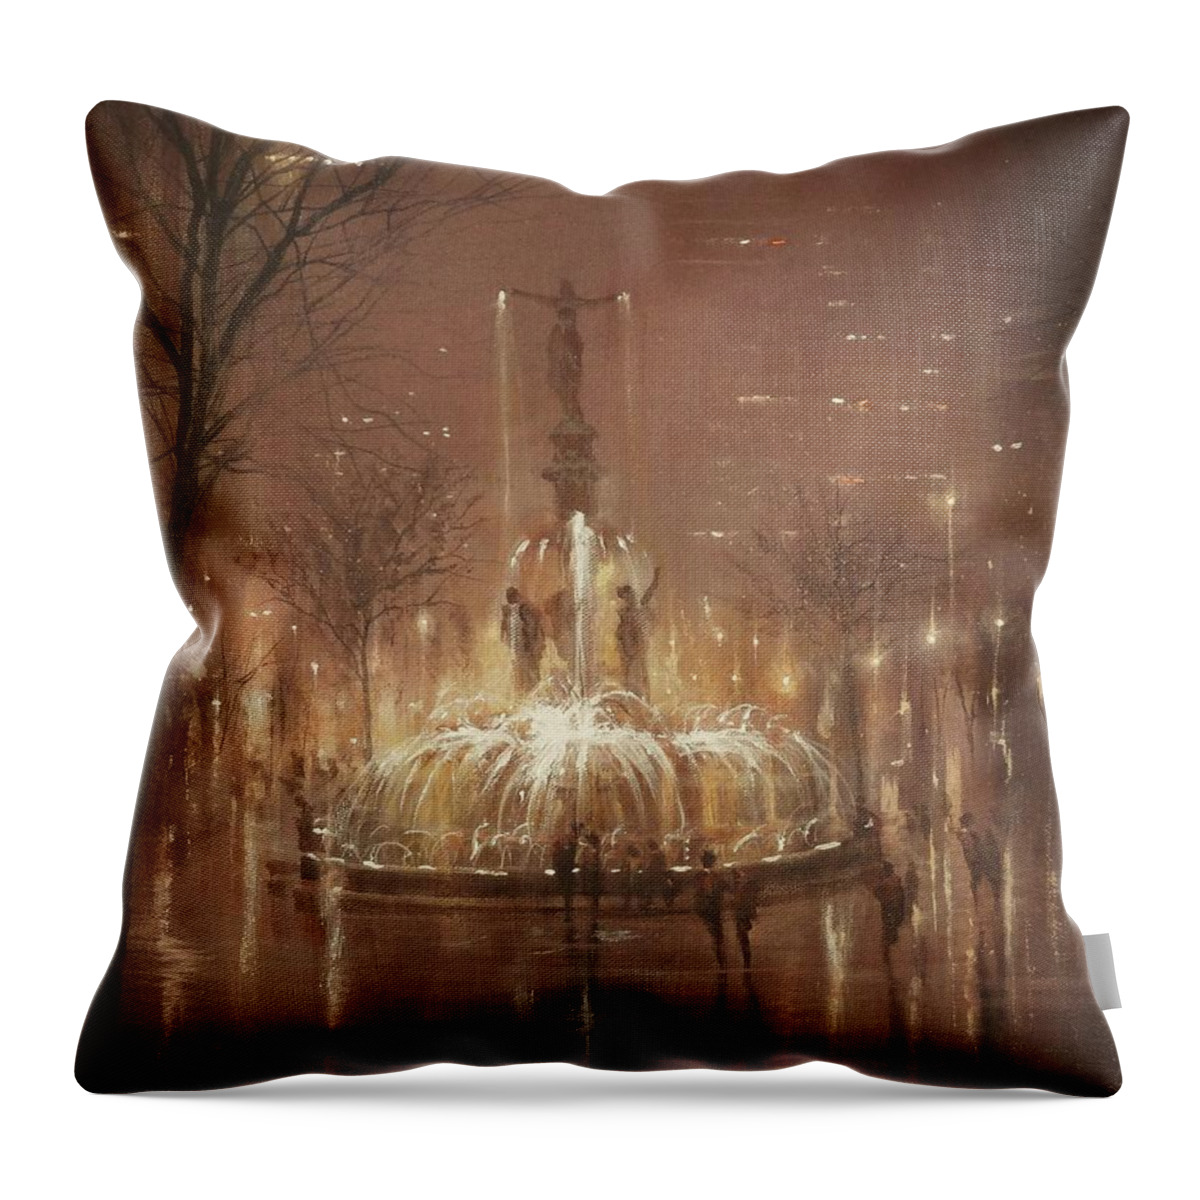 Fountain Square Throw Pillow featuring the painting Fountain Square by Tom Shropshire